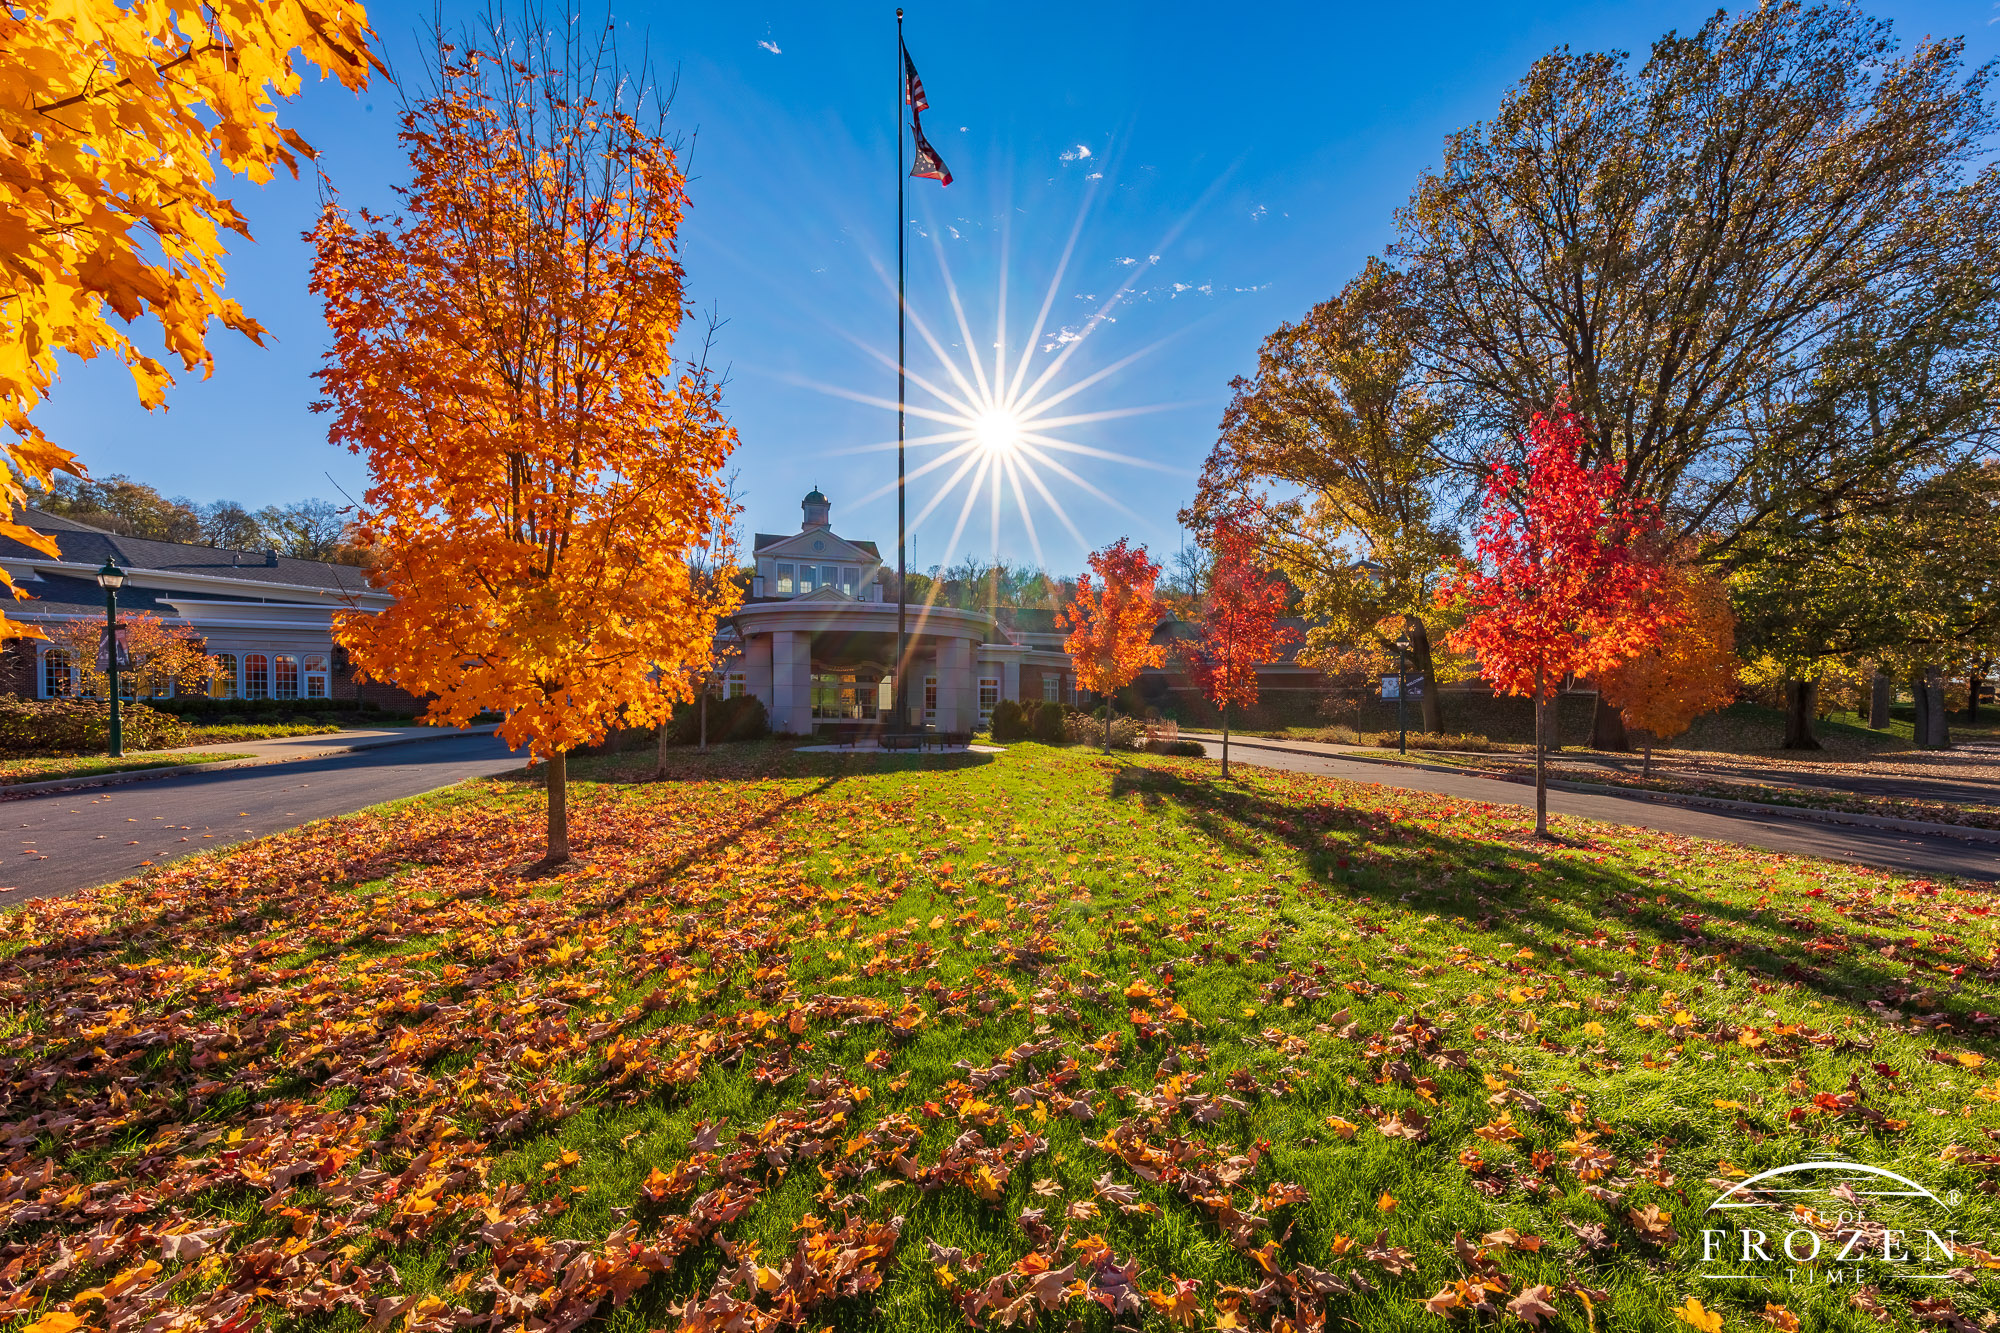 An alle front of Carillon Historical Park where the low-angled sun backlit the autumn leaves